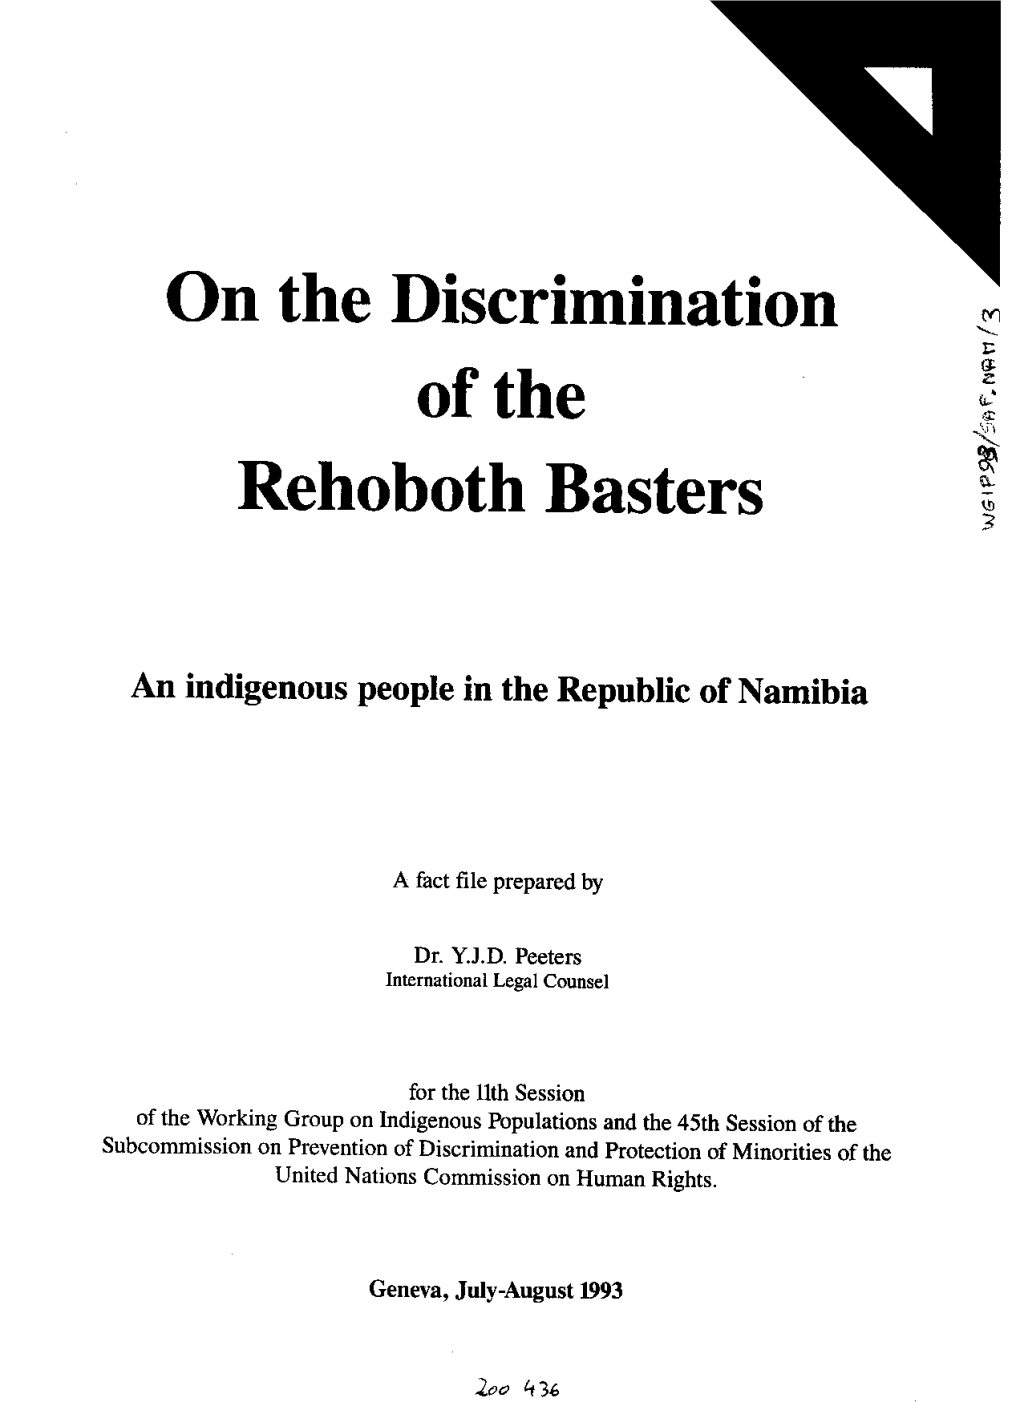 On the Discrimination of the Rehoboth Rasters